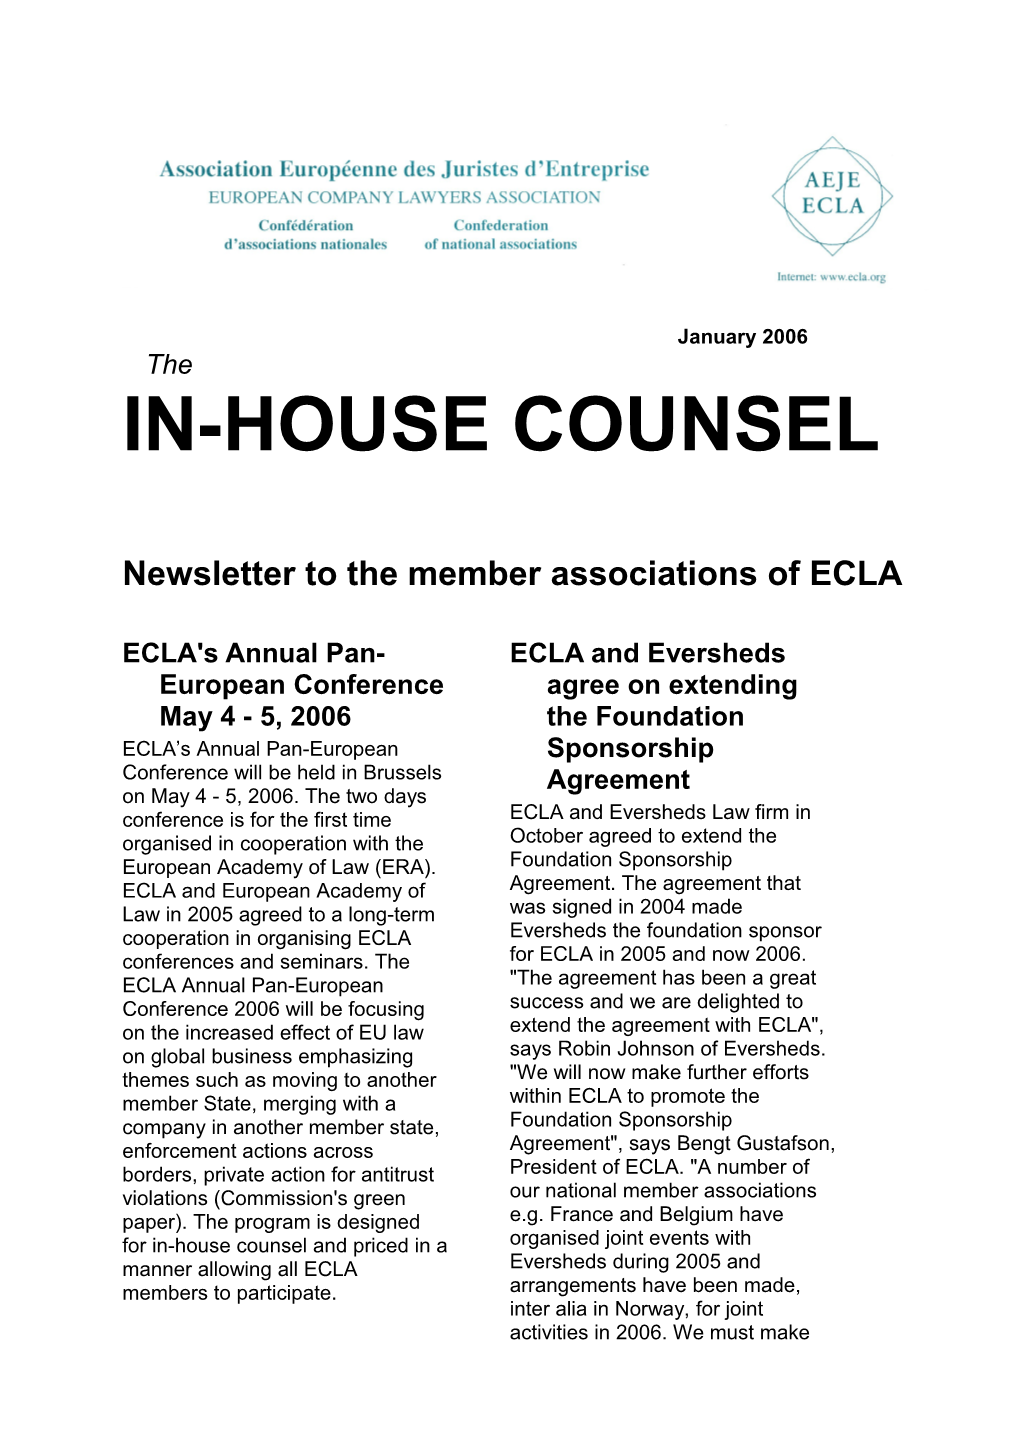 Newsletter to the Member Associations of ECLA